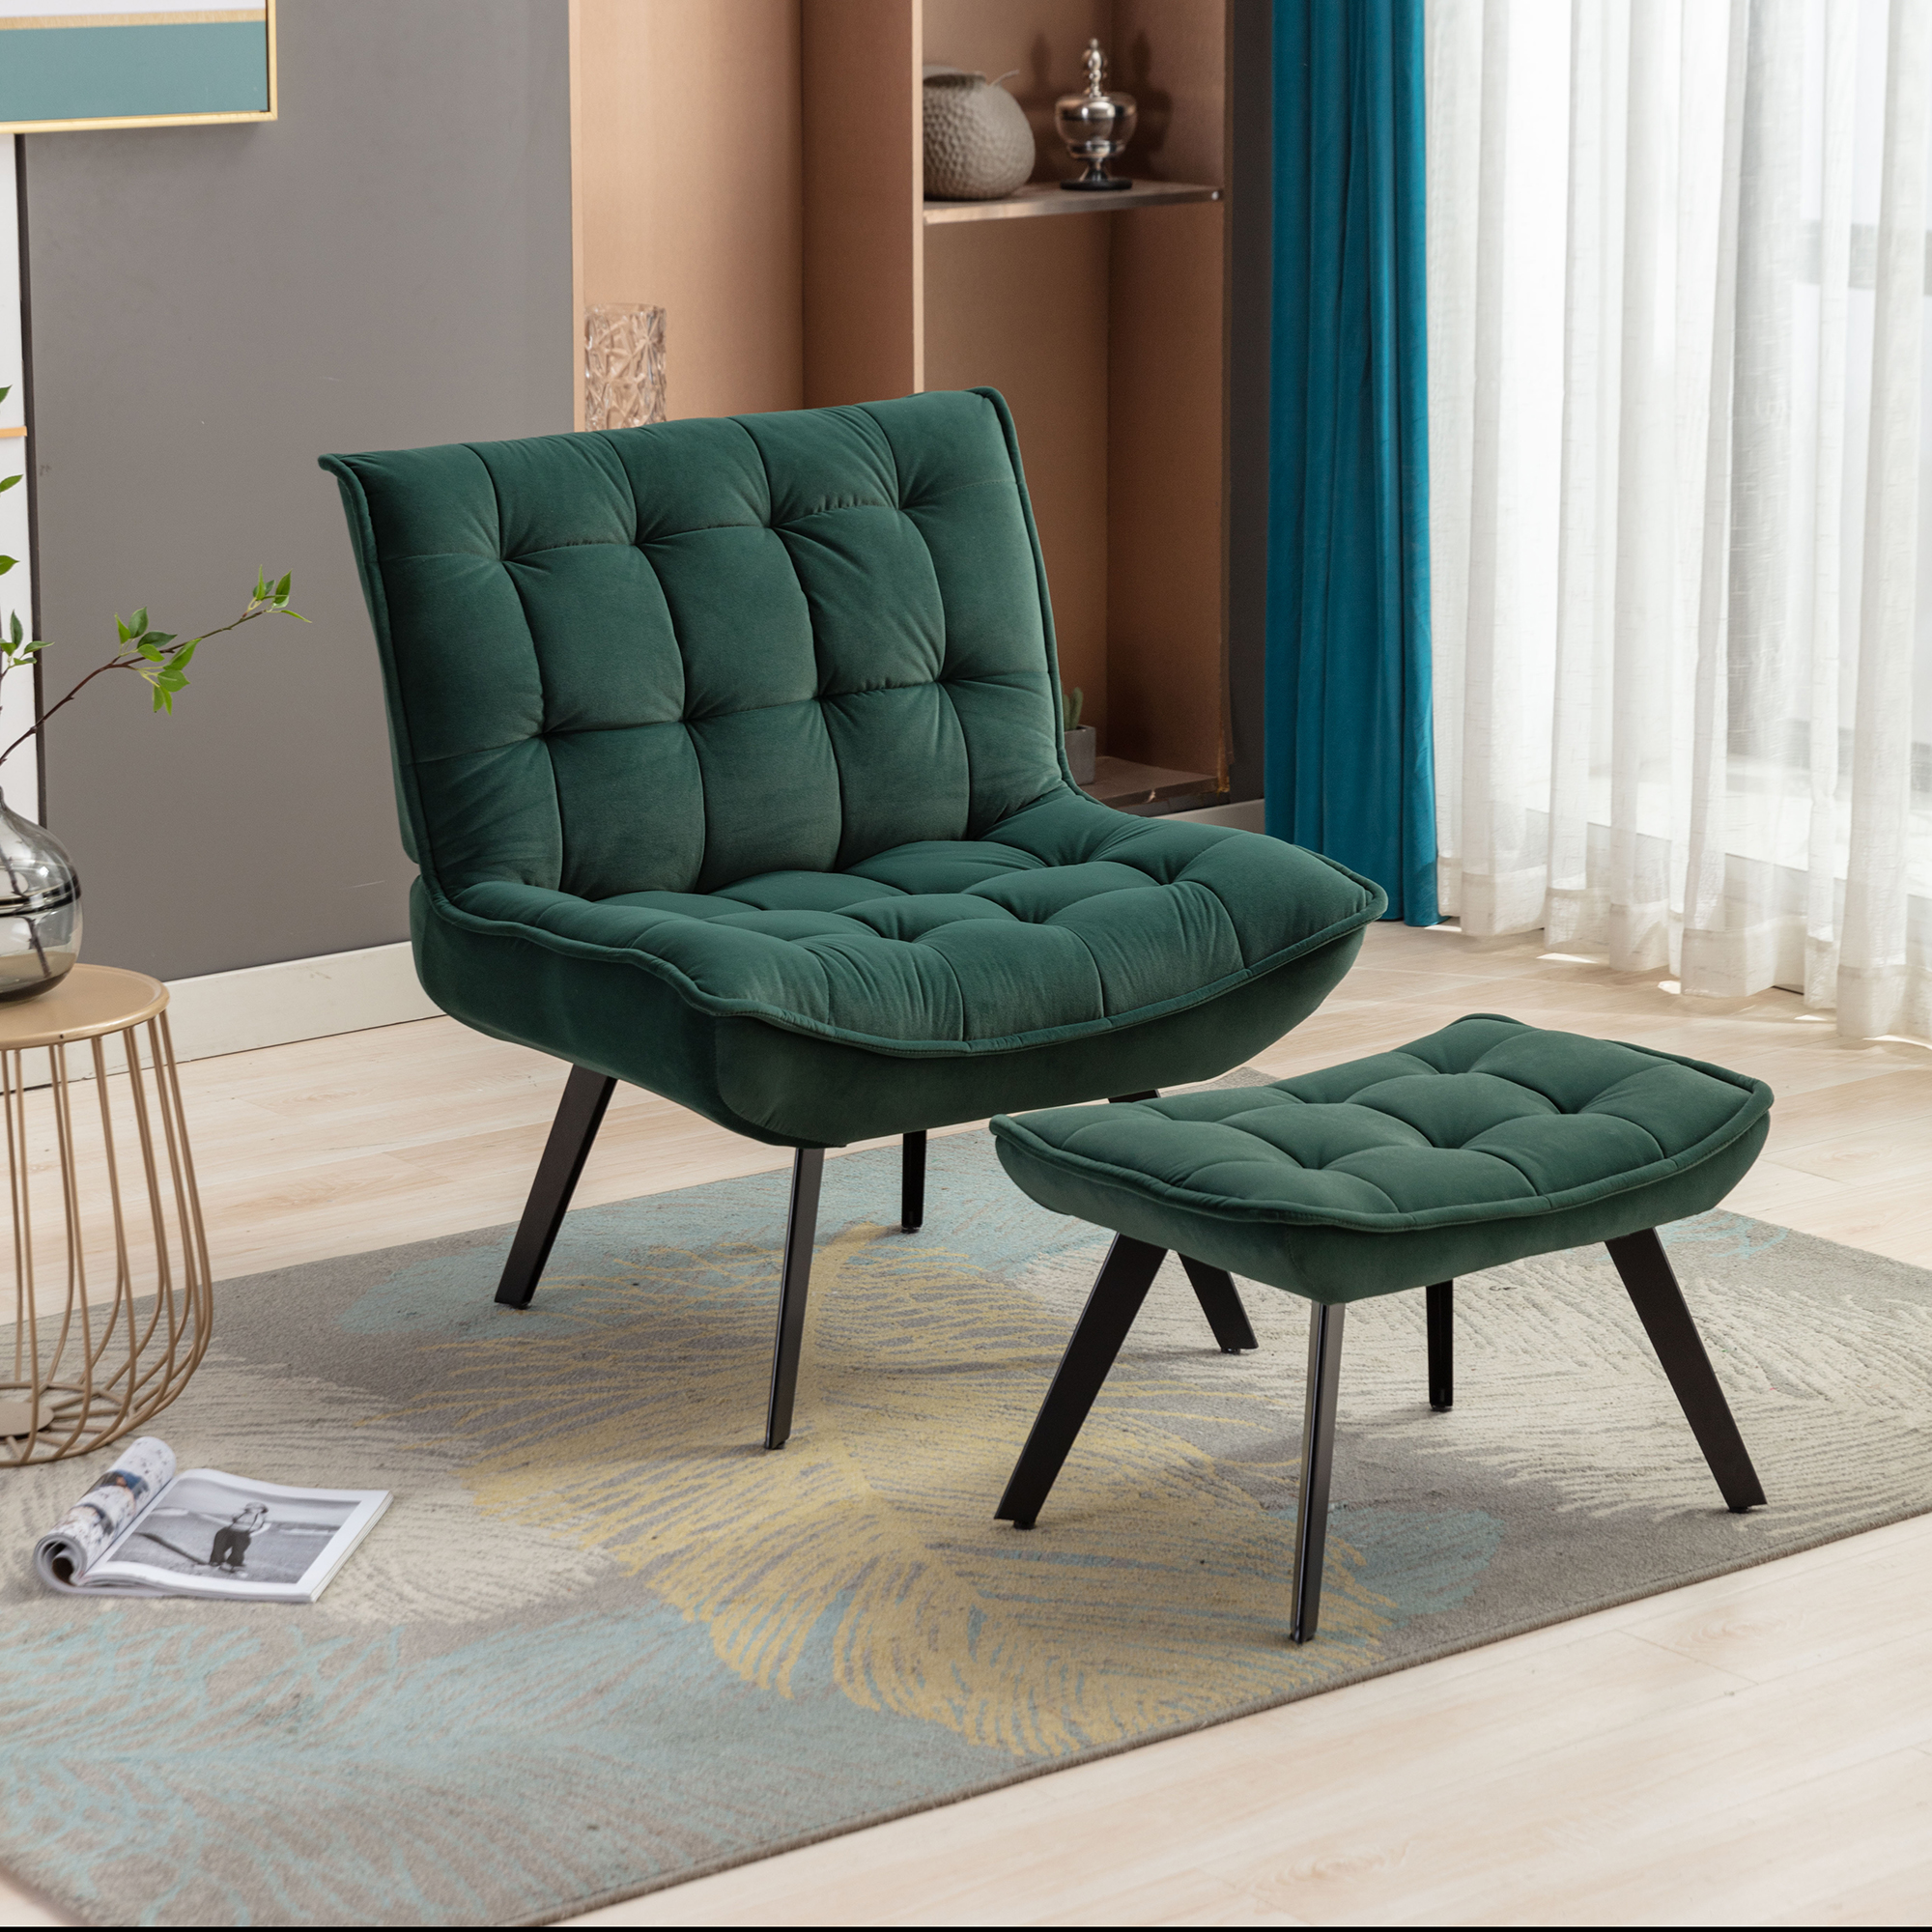 Modern Soft Velvet Fabric Material Large Width Accent Chair Leisure Chair Armchair TV Chair Bedroom Chair With Ottoman Black Legs For Indoor Home And Living Room,Dark Green-CASAINC